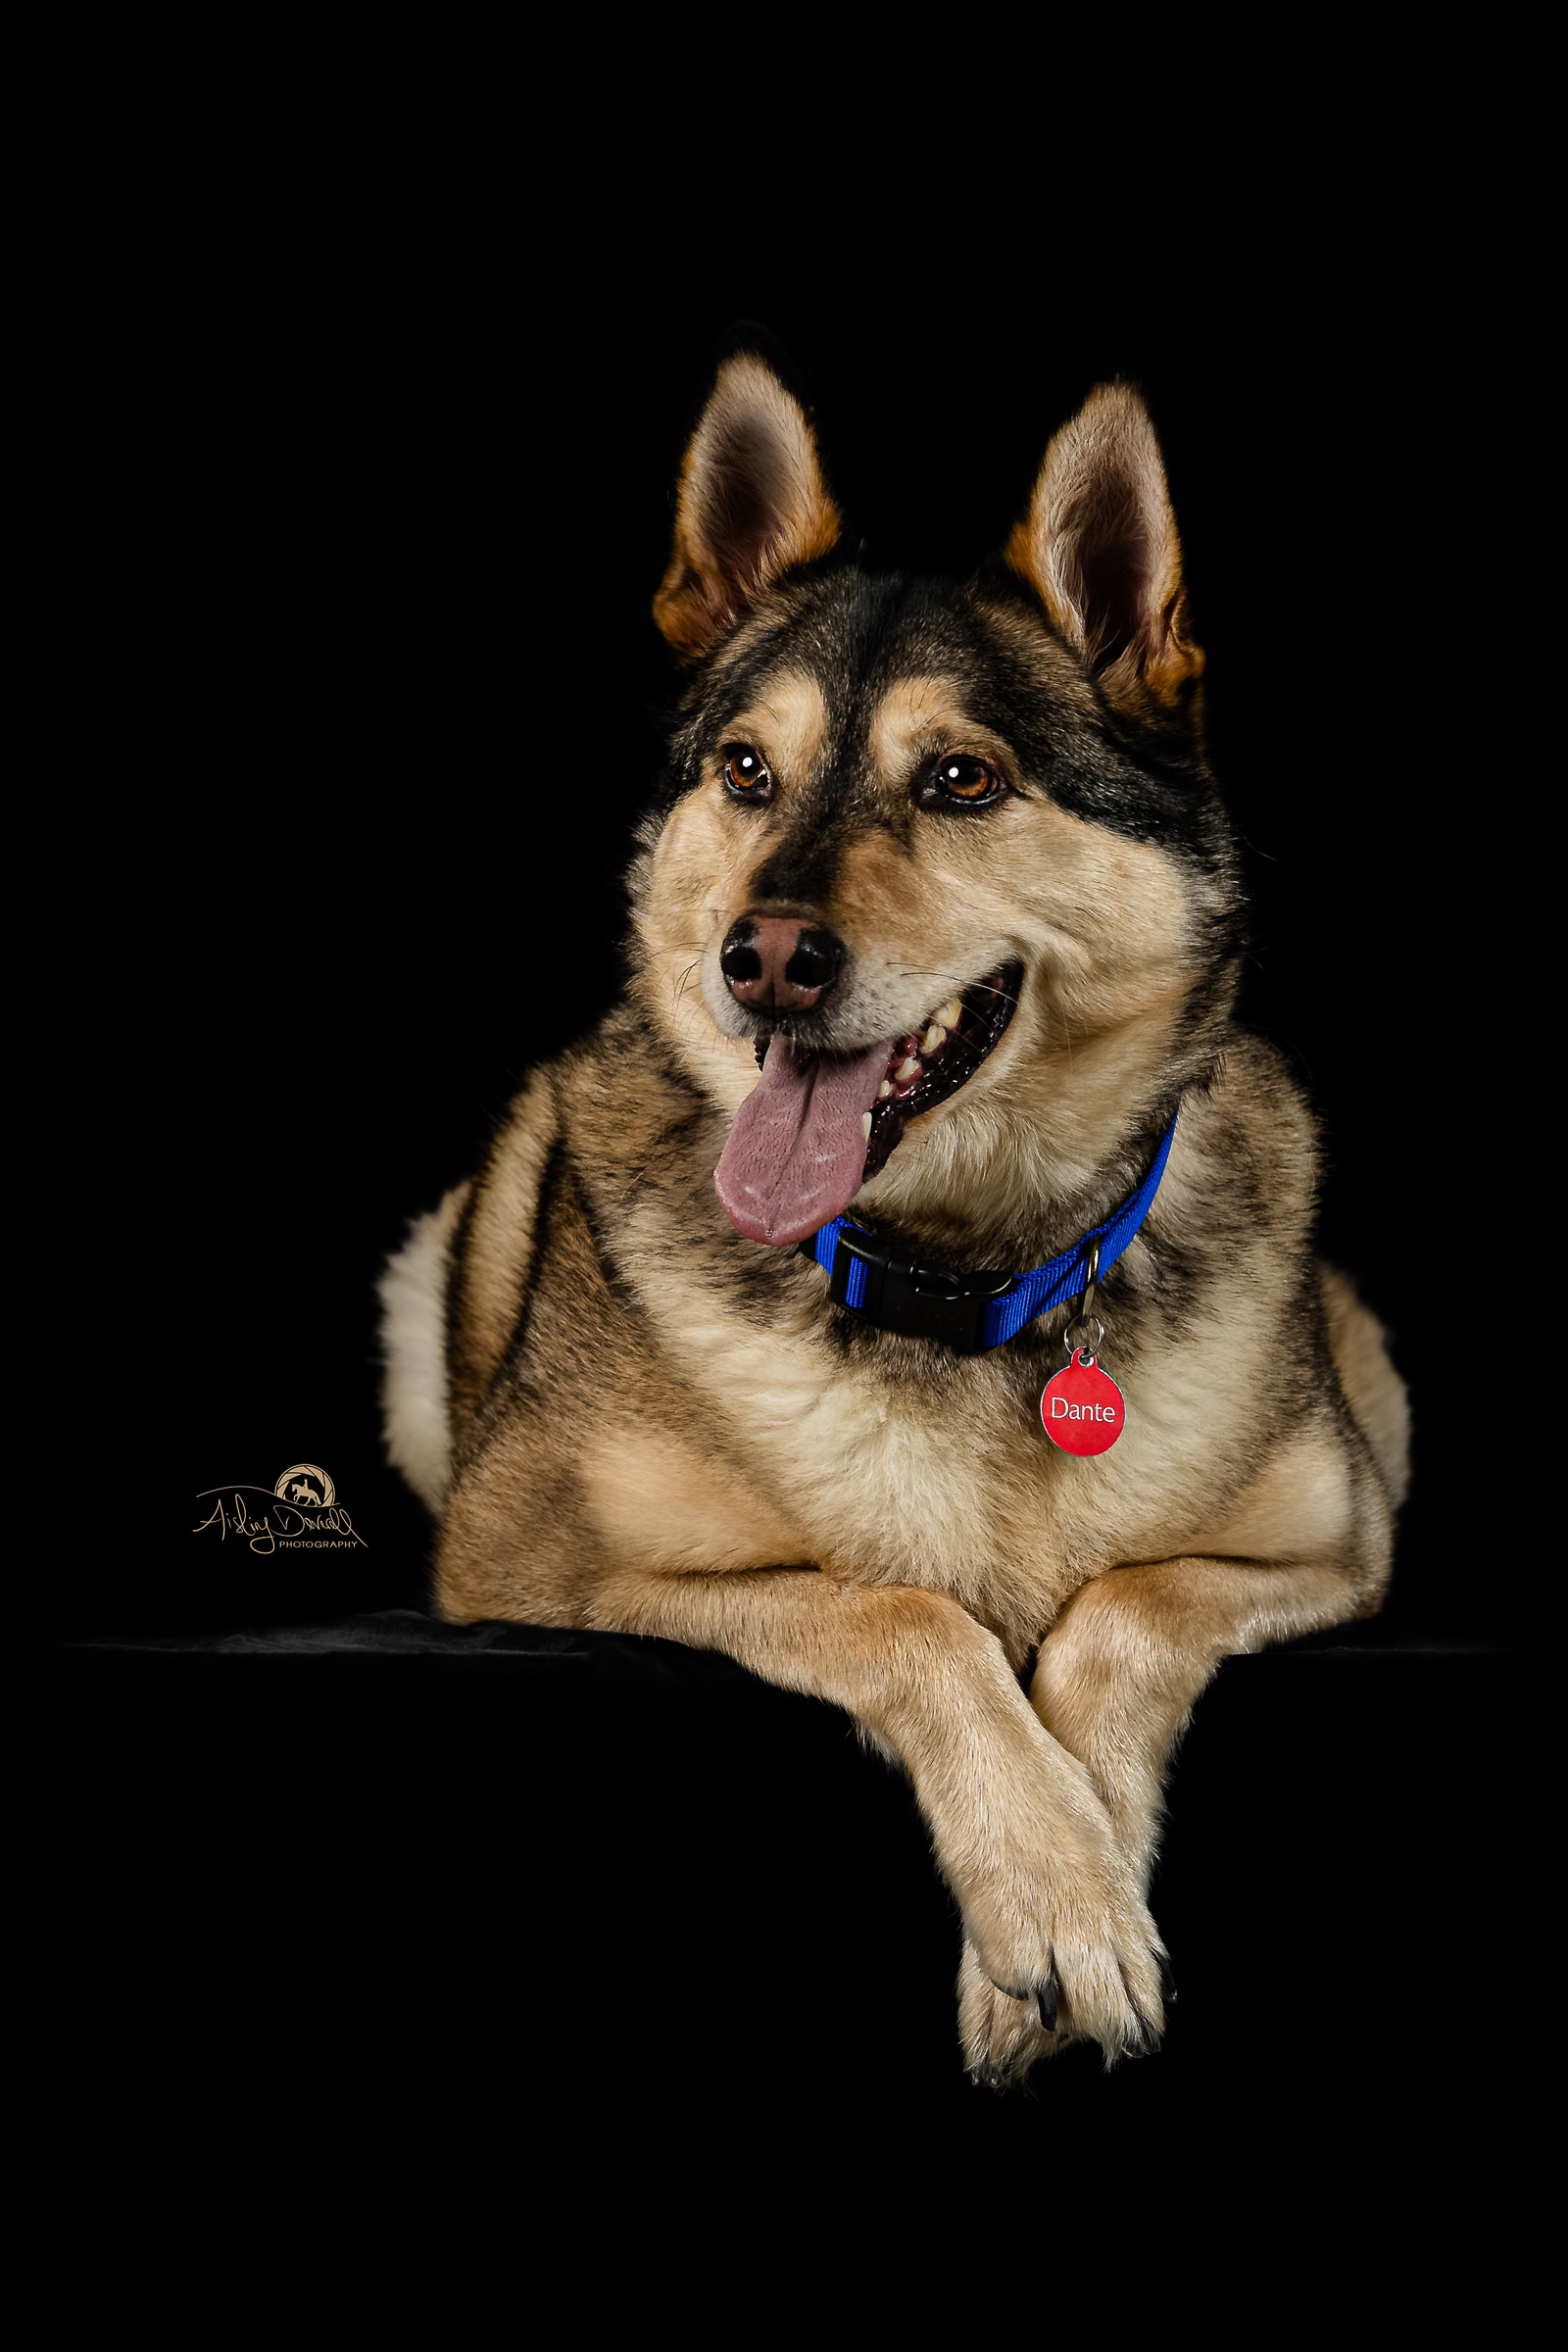 dog portrait photograph of a Husky German Shepard dog cross breed in a photographic studio with a black background